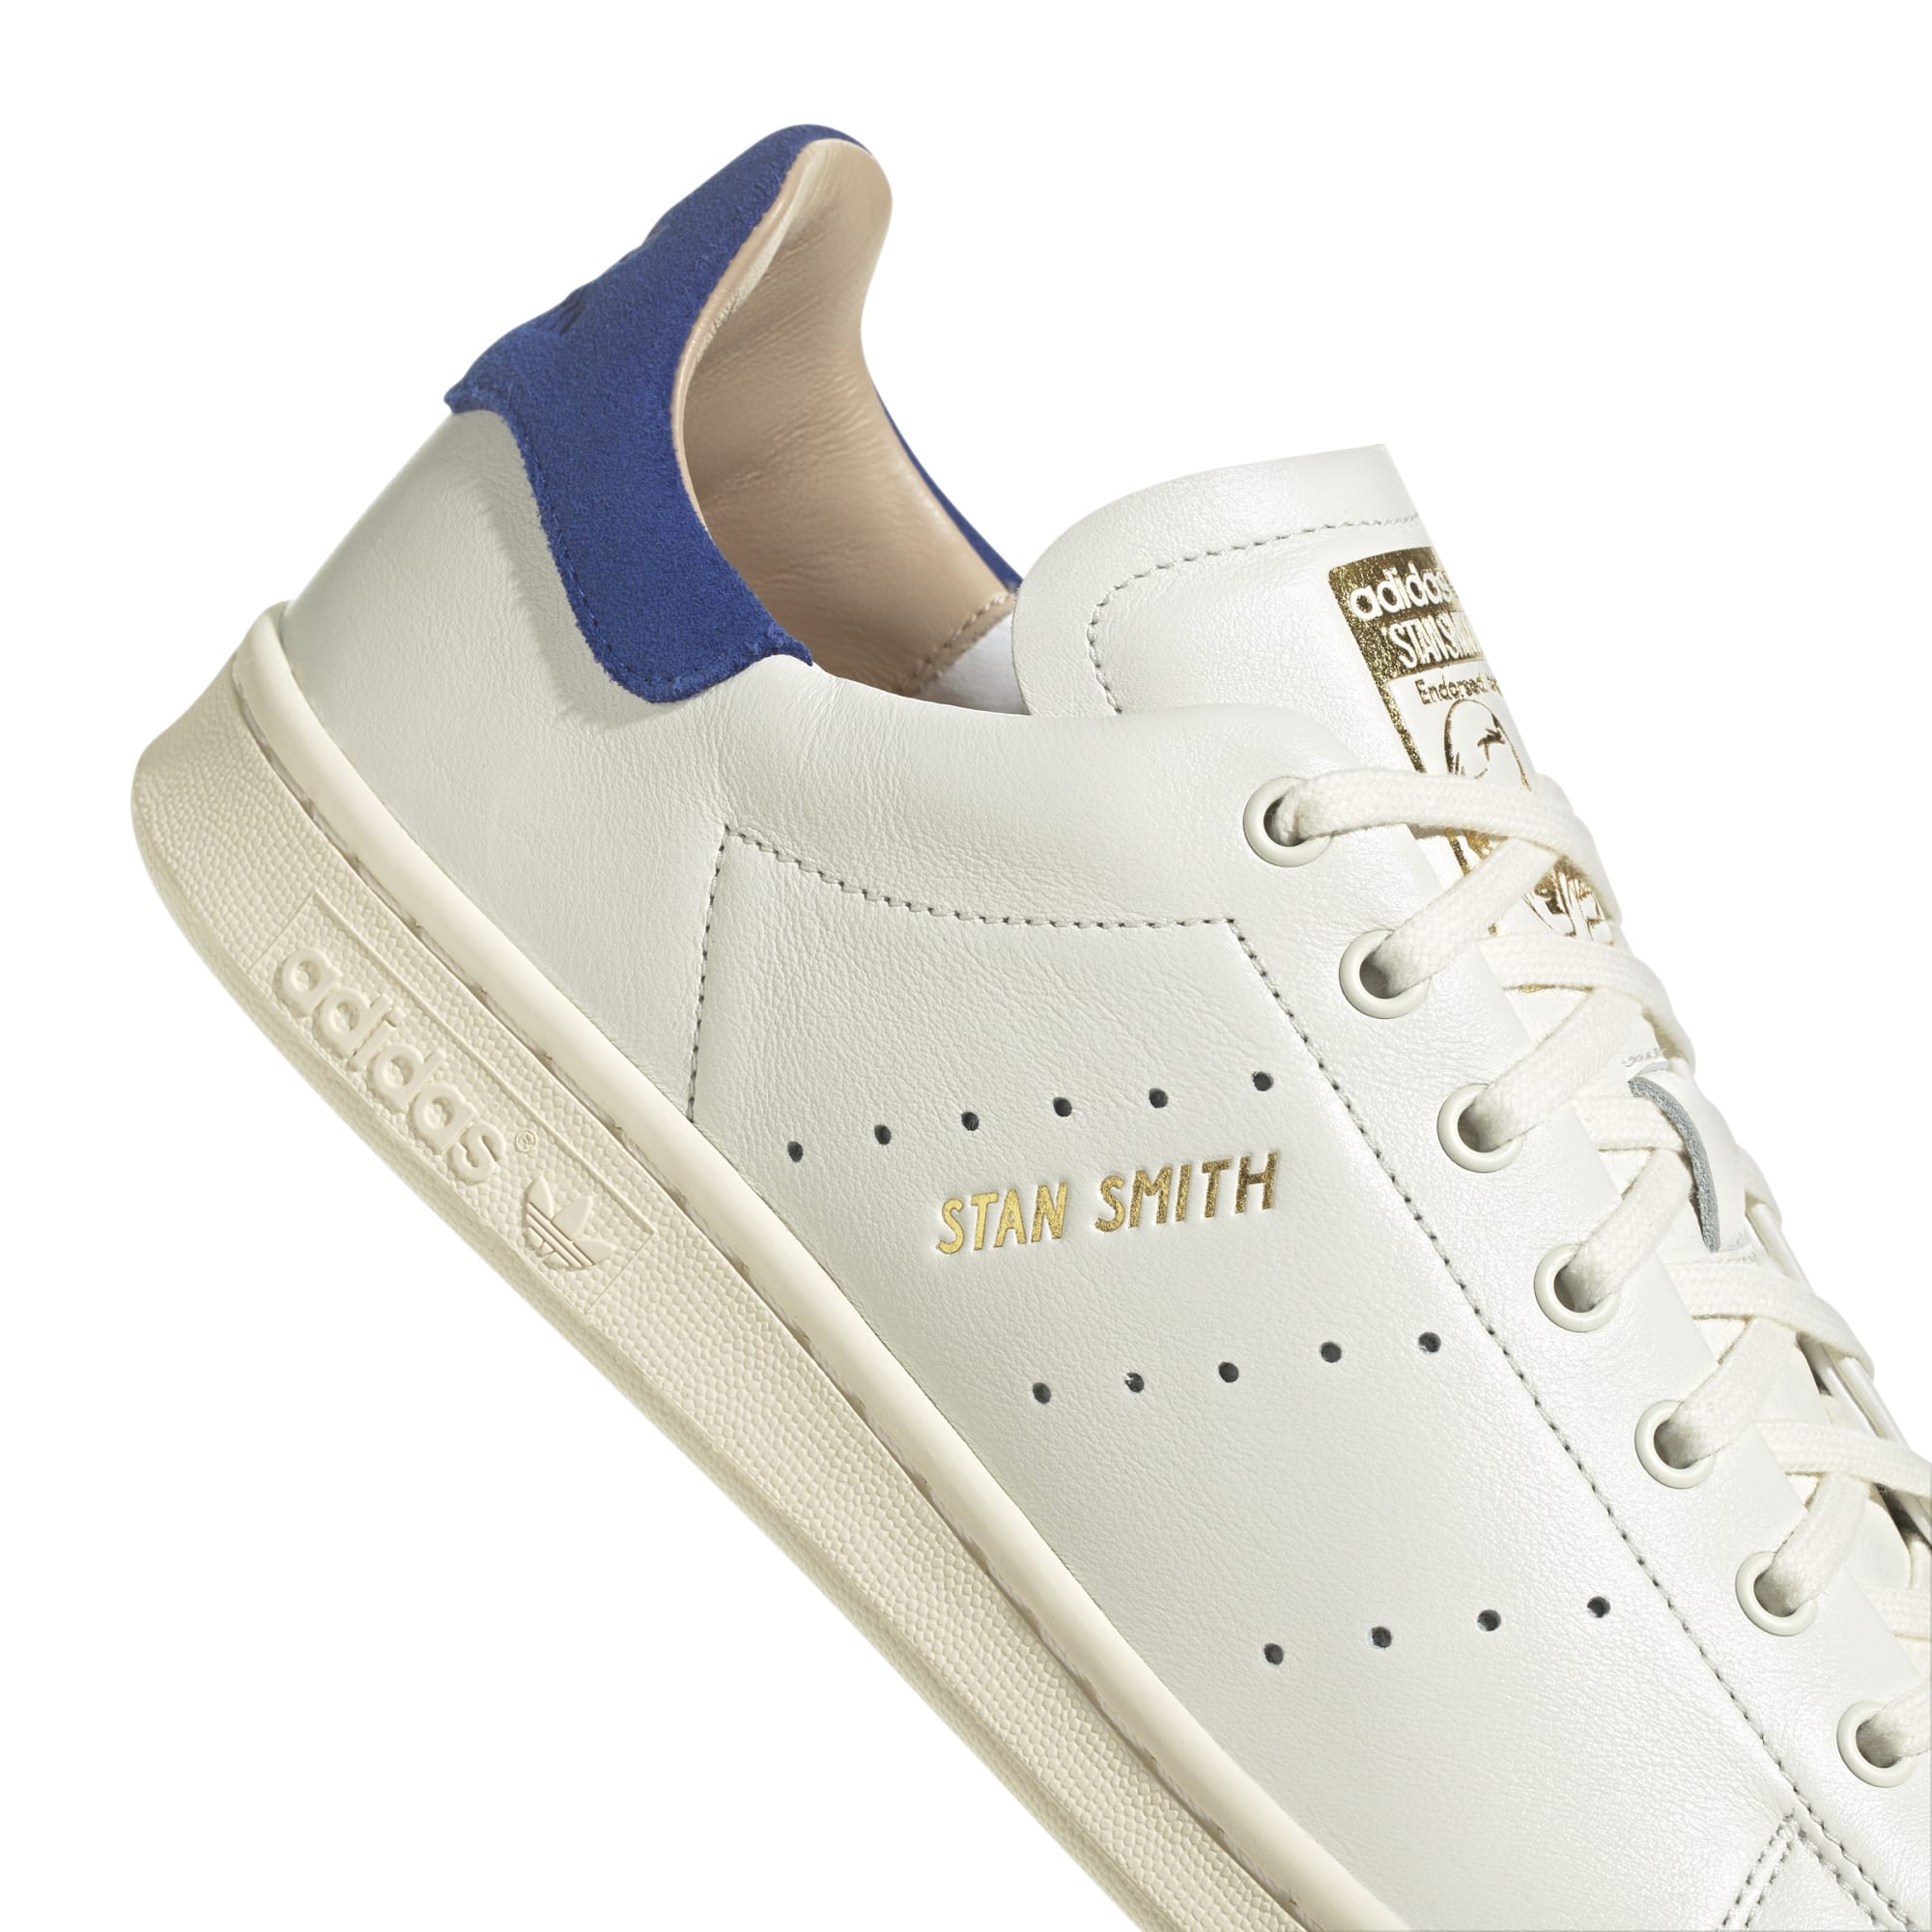 ADIDAS STAN SMITH LUX ID1995 SNEAKER (M)